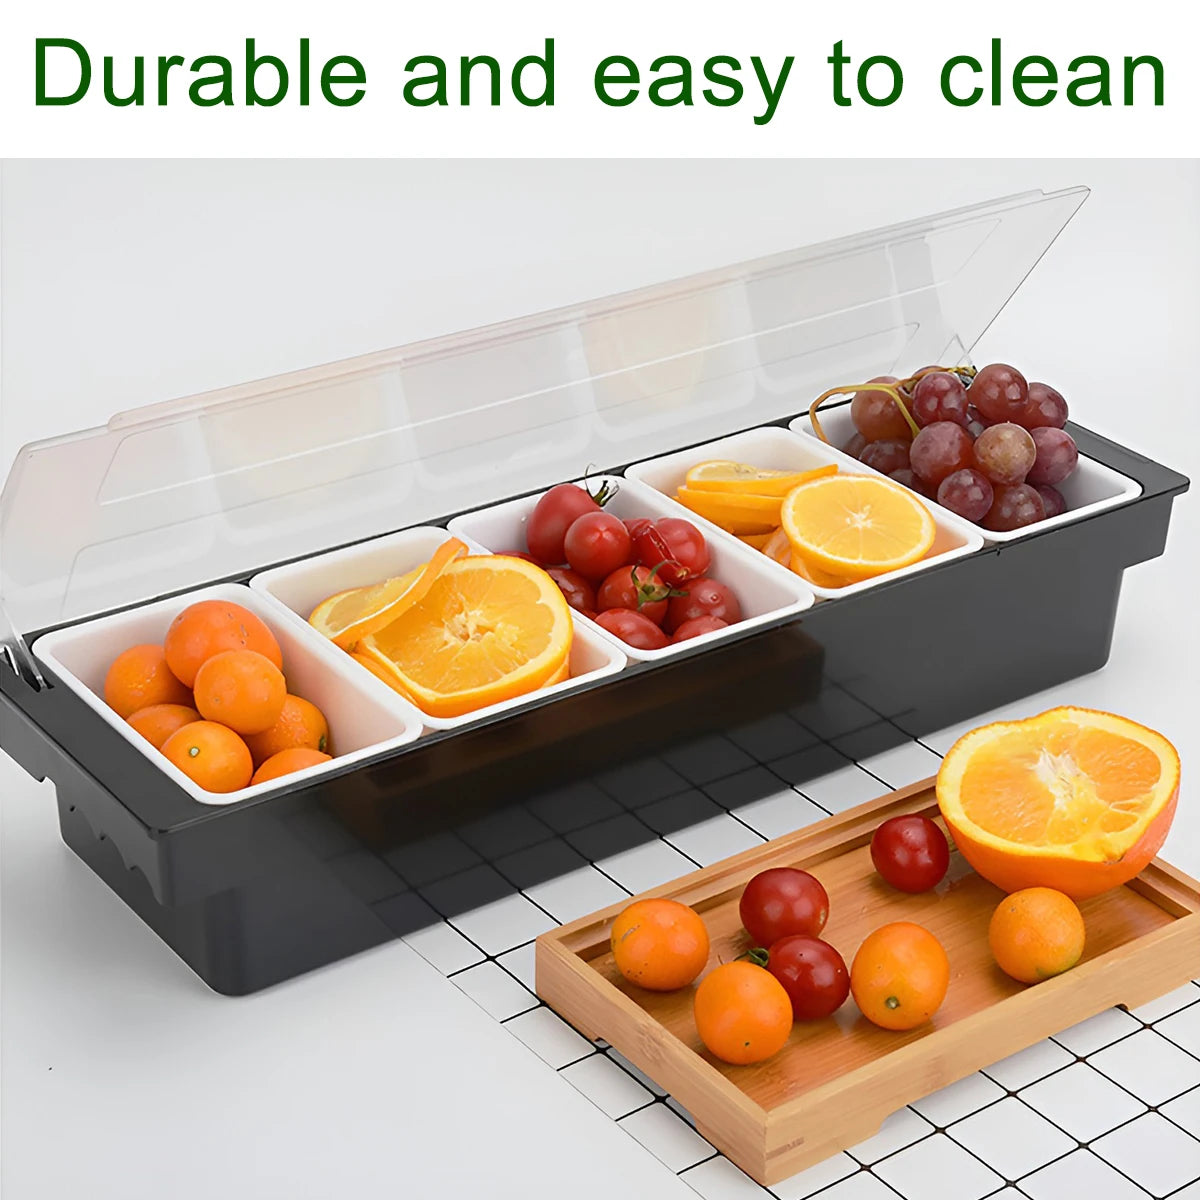 Modular Refrigerator Storage Containers With Clear Lid